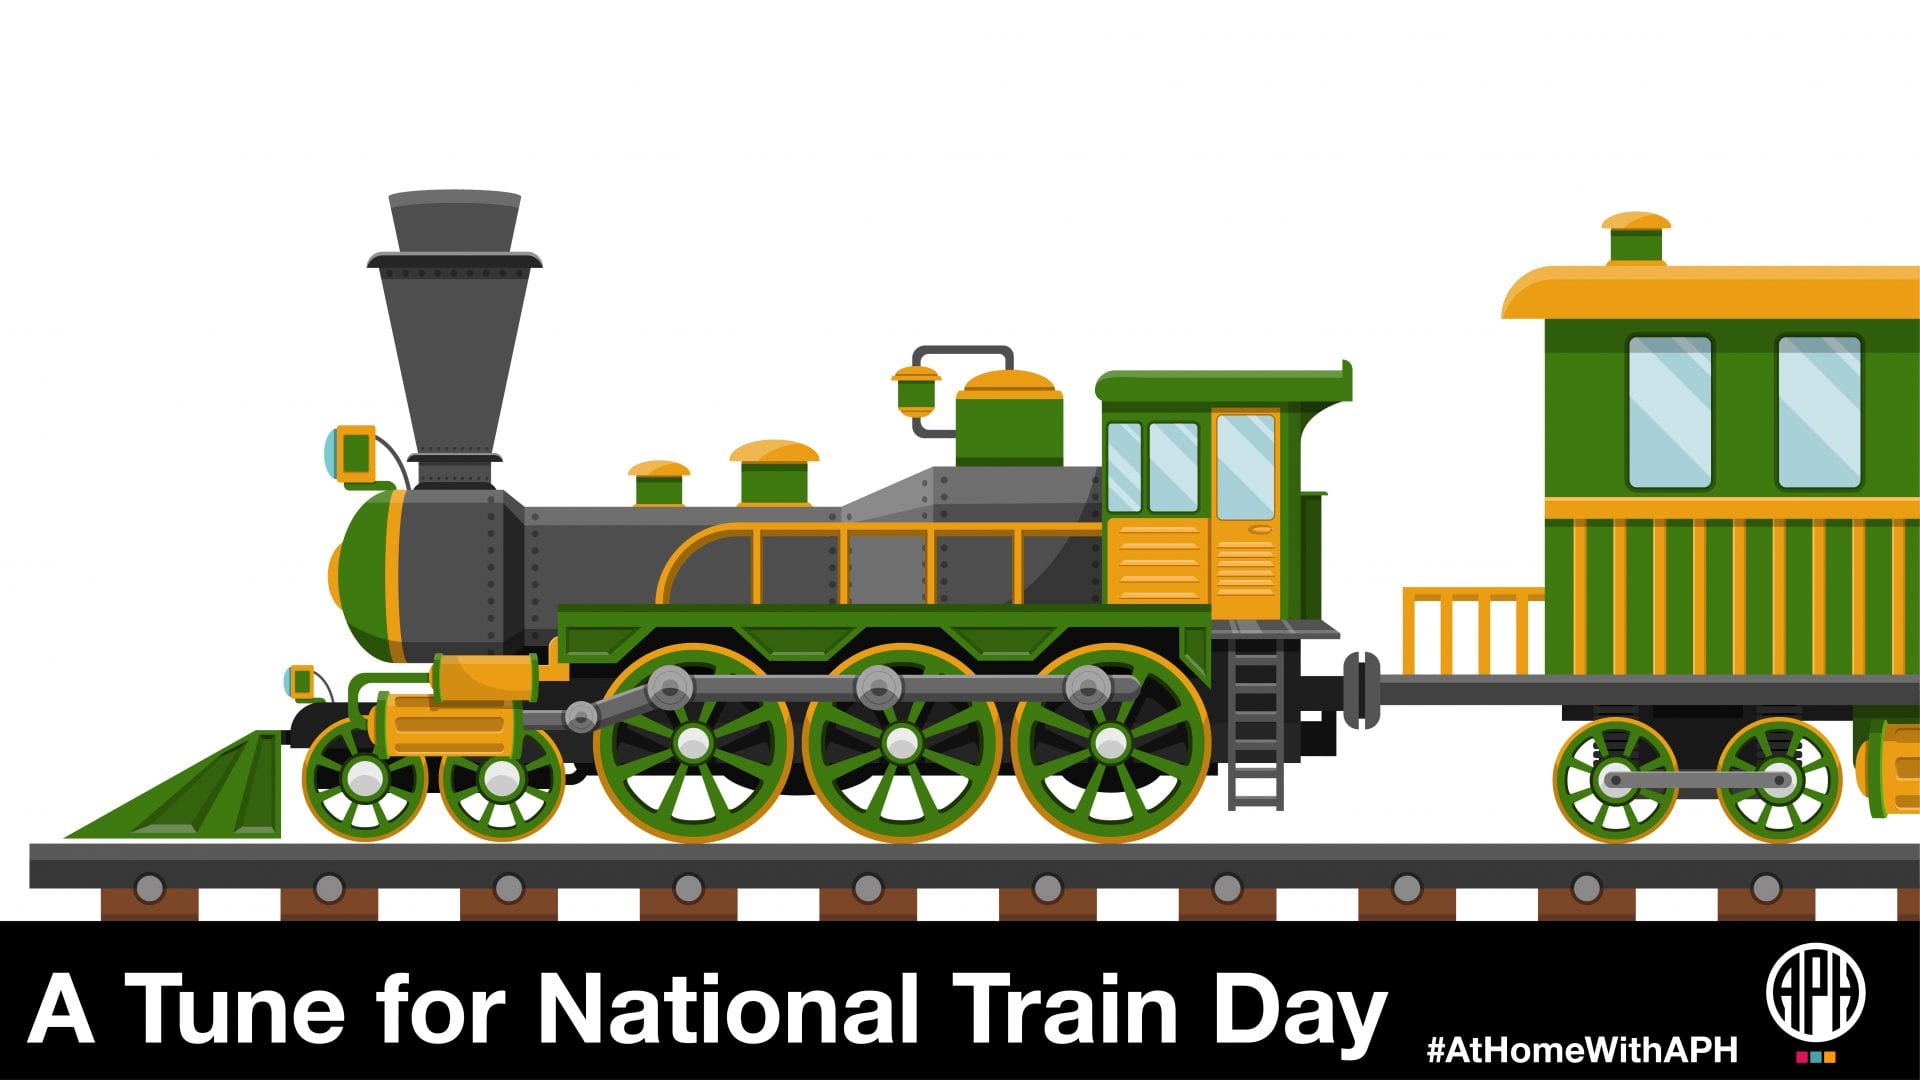 a illustration of train, text reads "A Tune for National Train Day #AtHomeWithAPH"